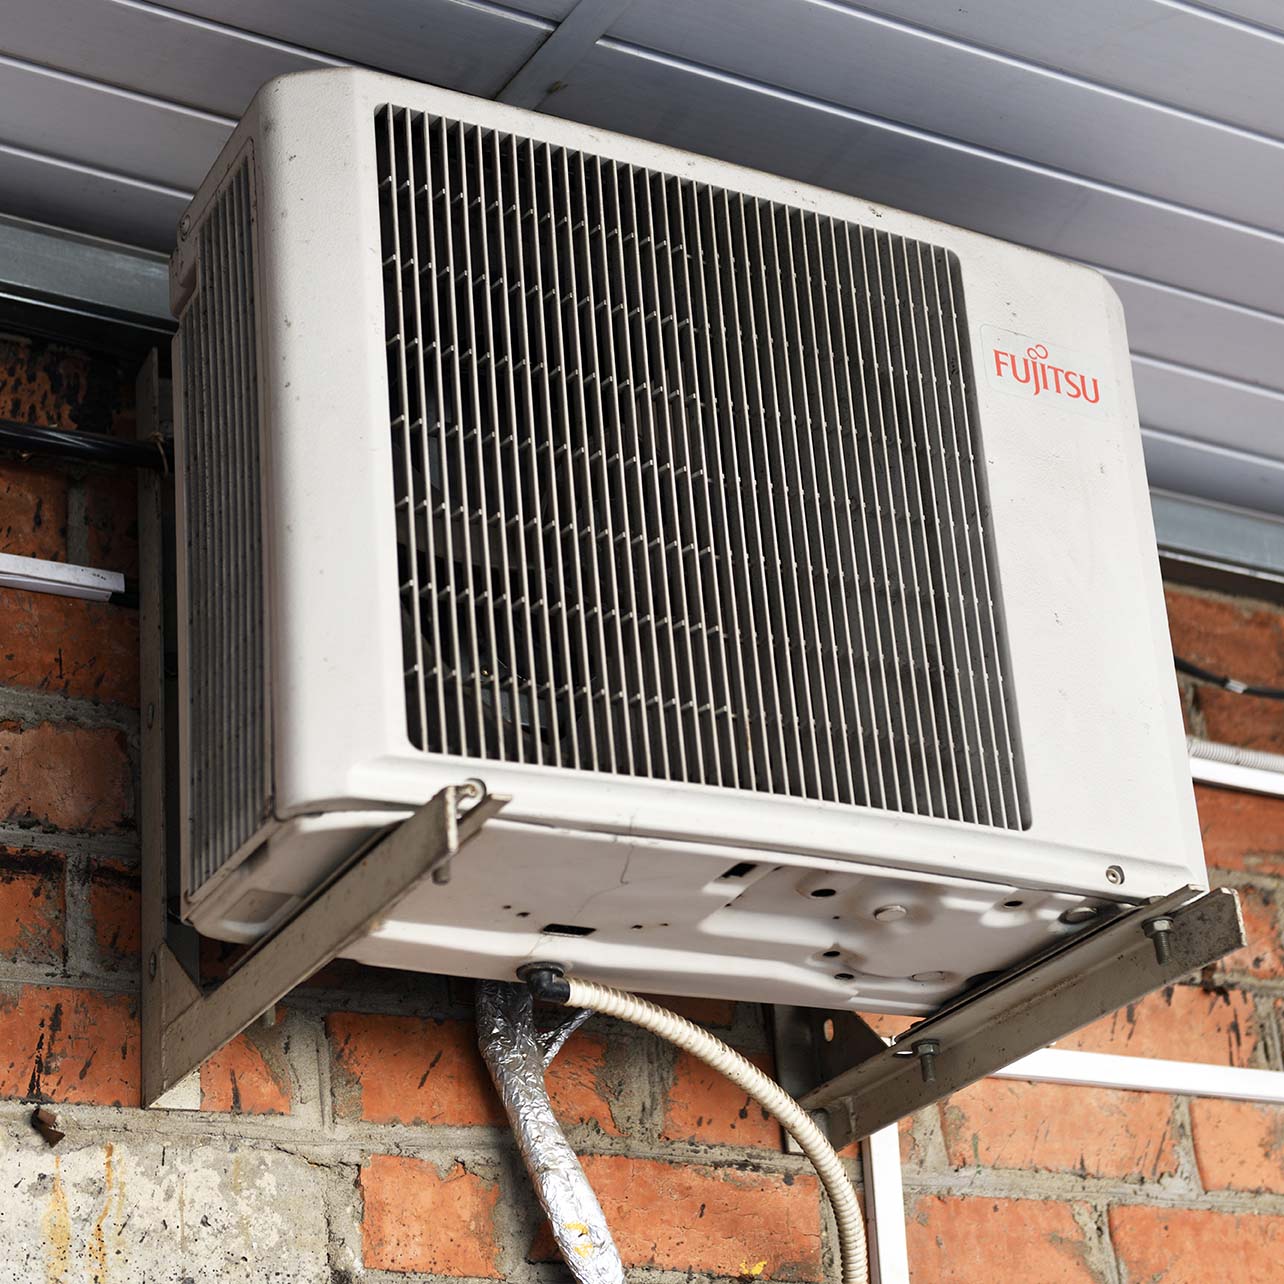 How To Operate A Fujitsu Air Conditioner